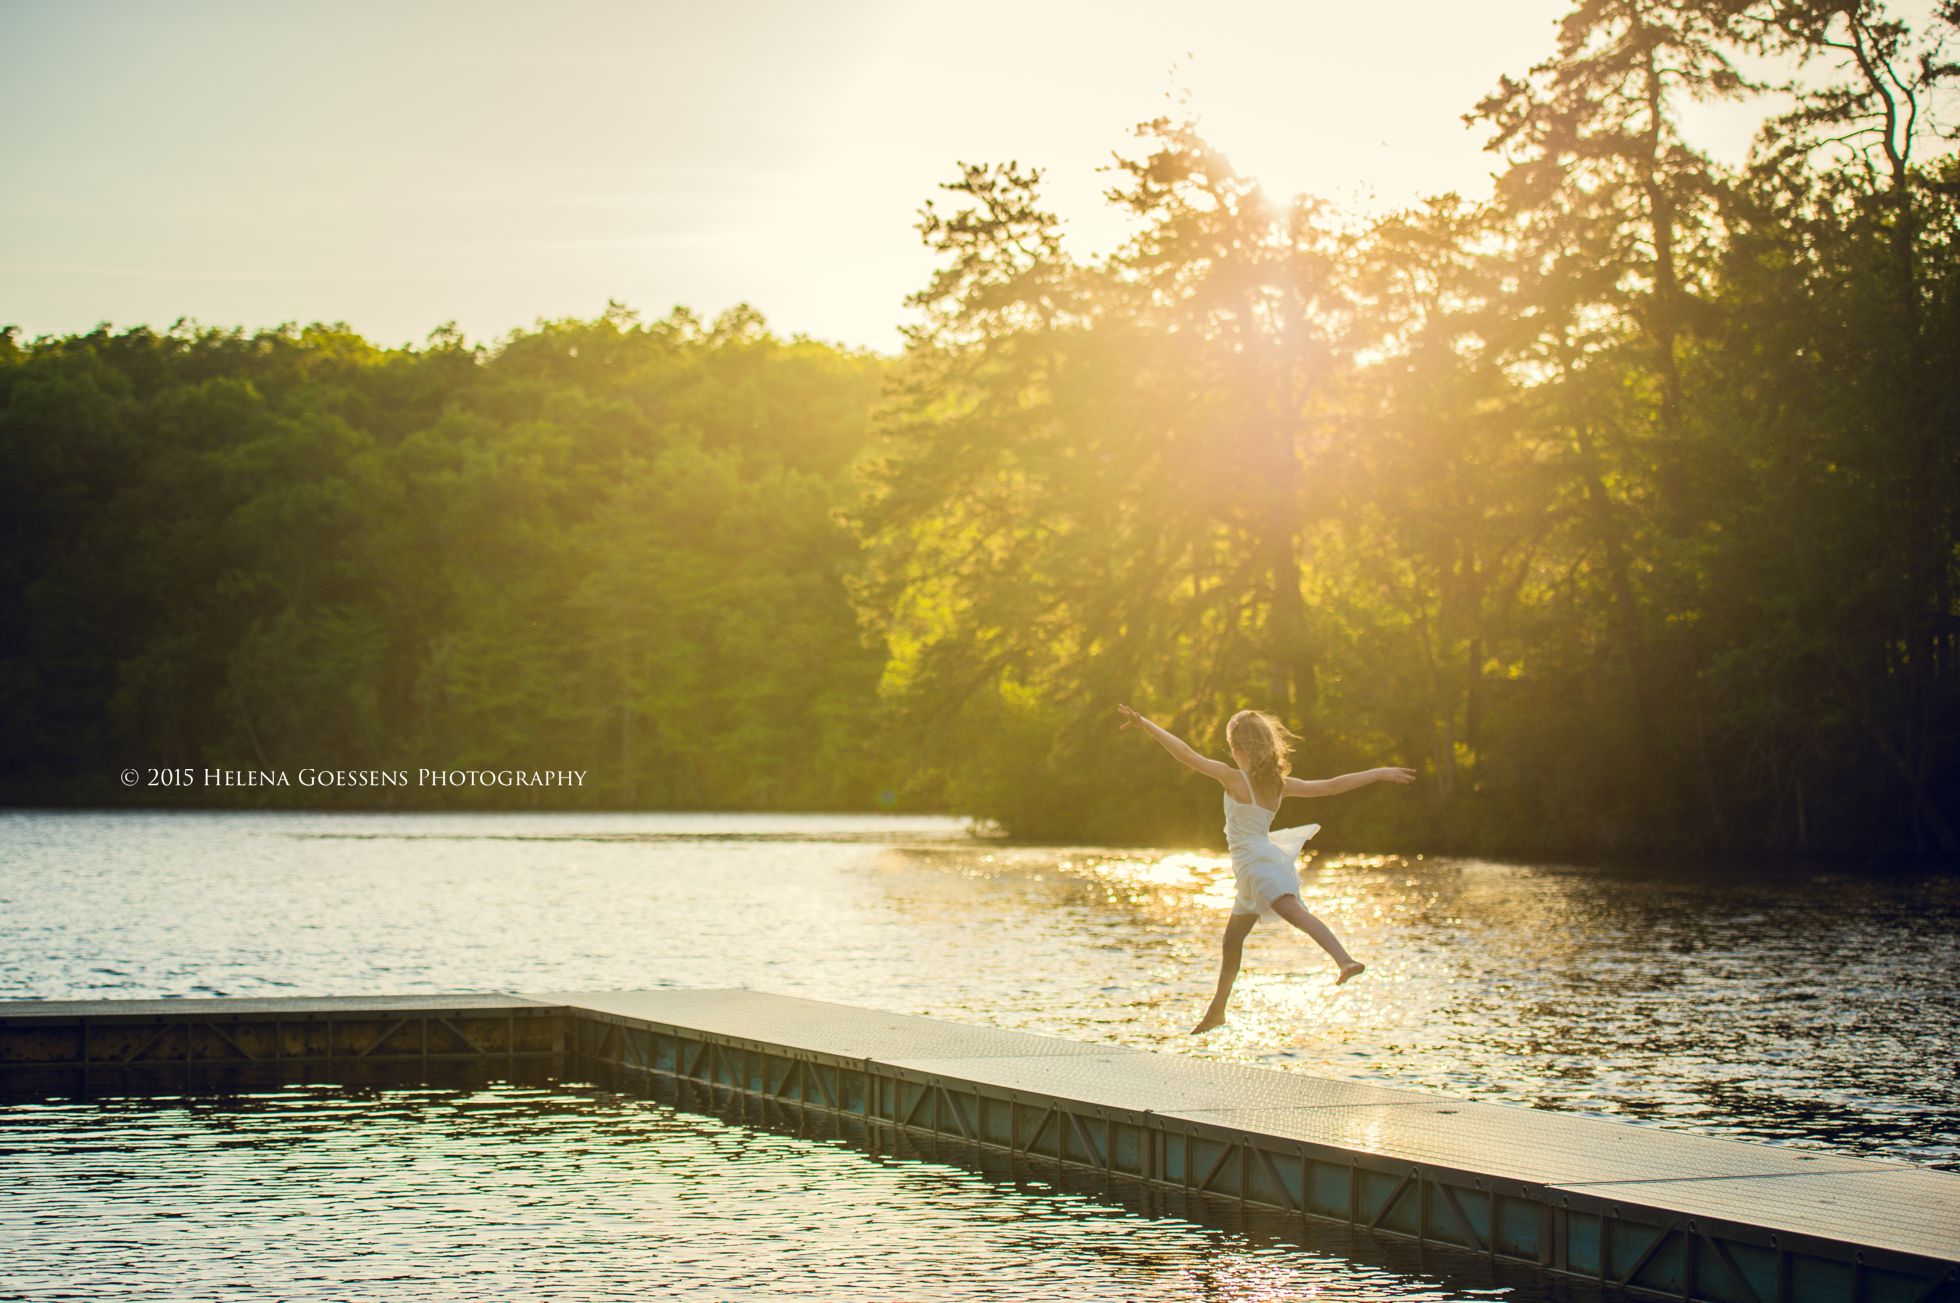 Girl jumping in a lake at sunset